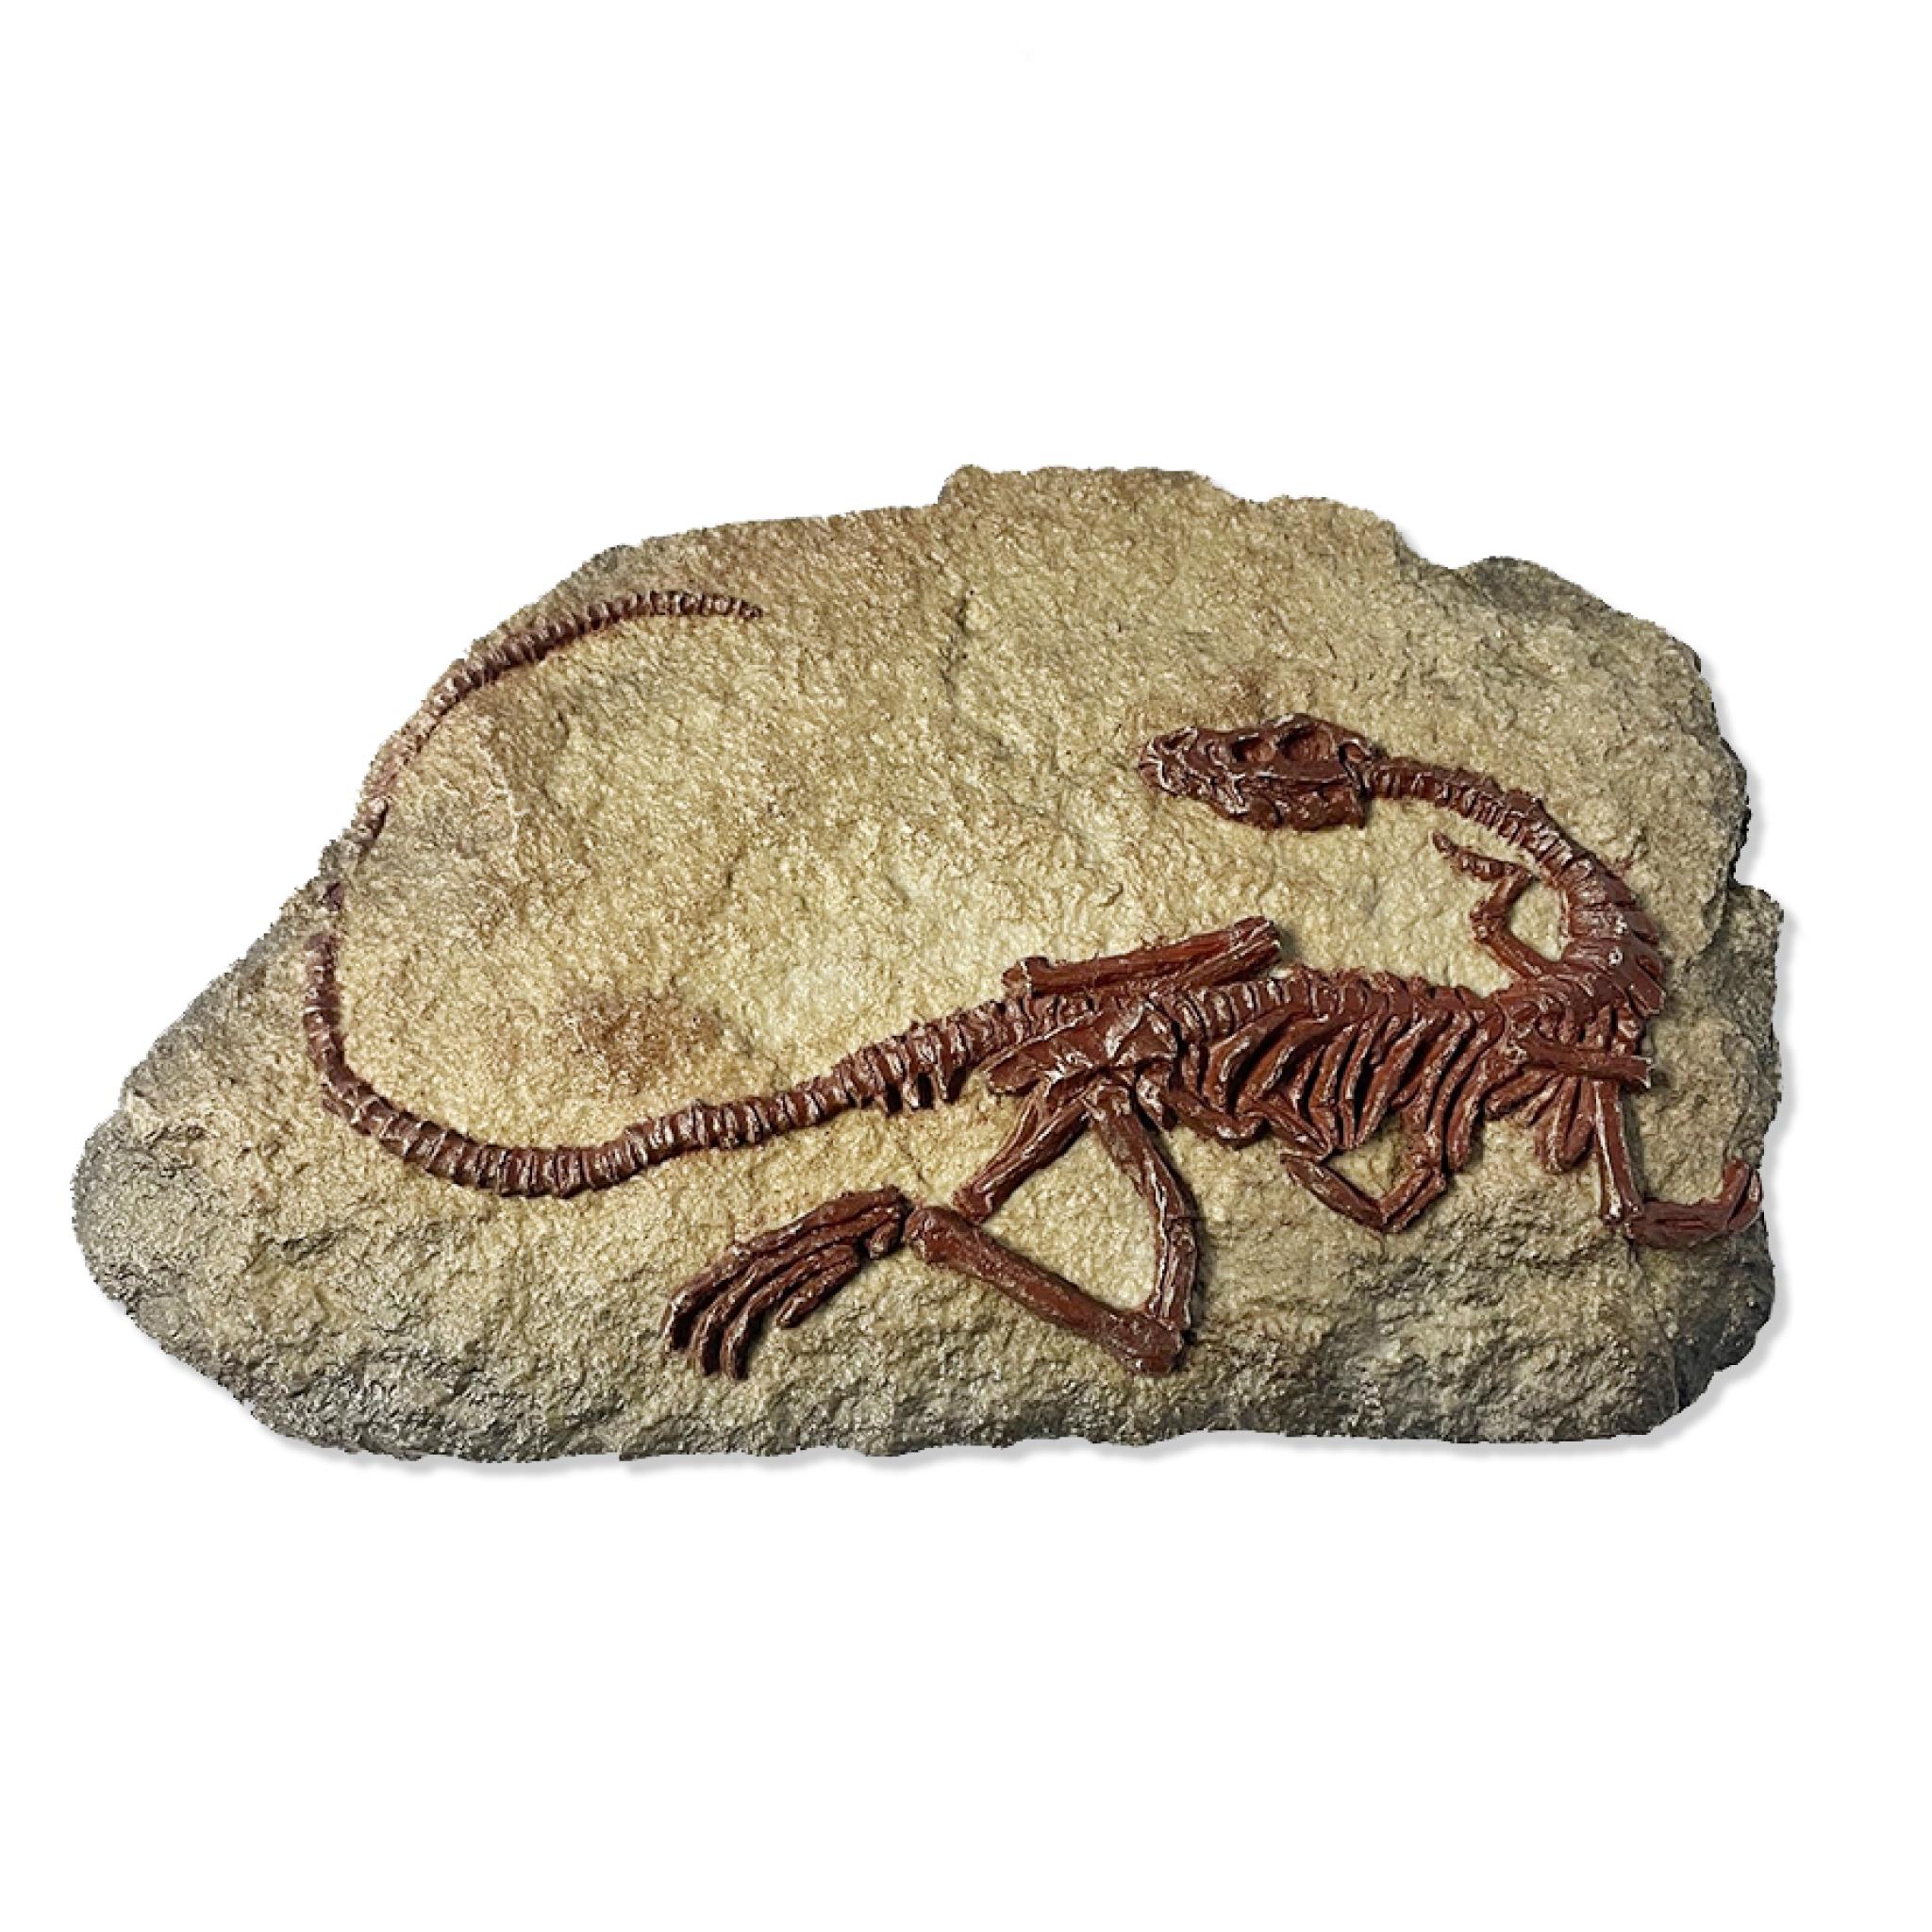 Replica Coelophysis Fossil | Starbeck Education